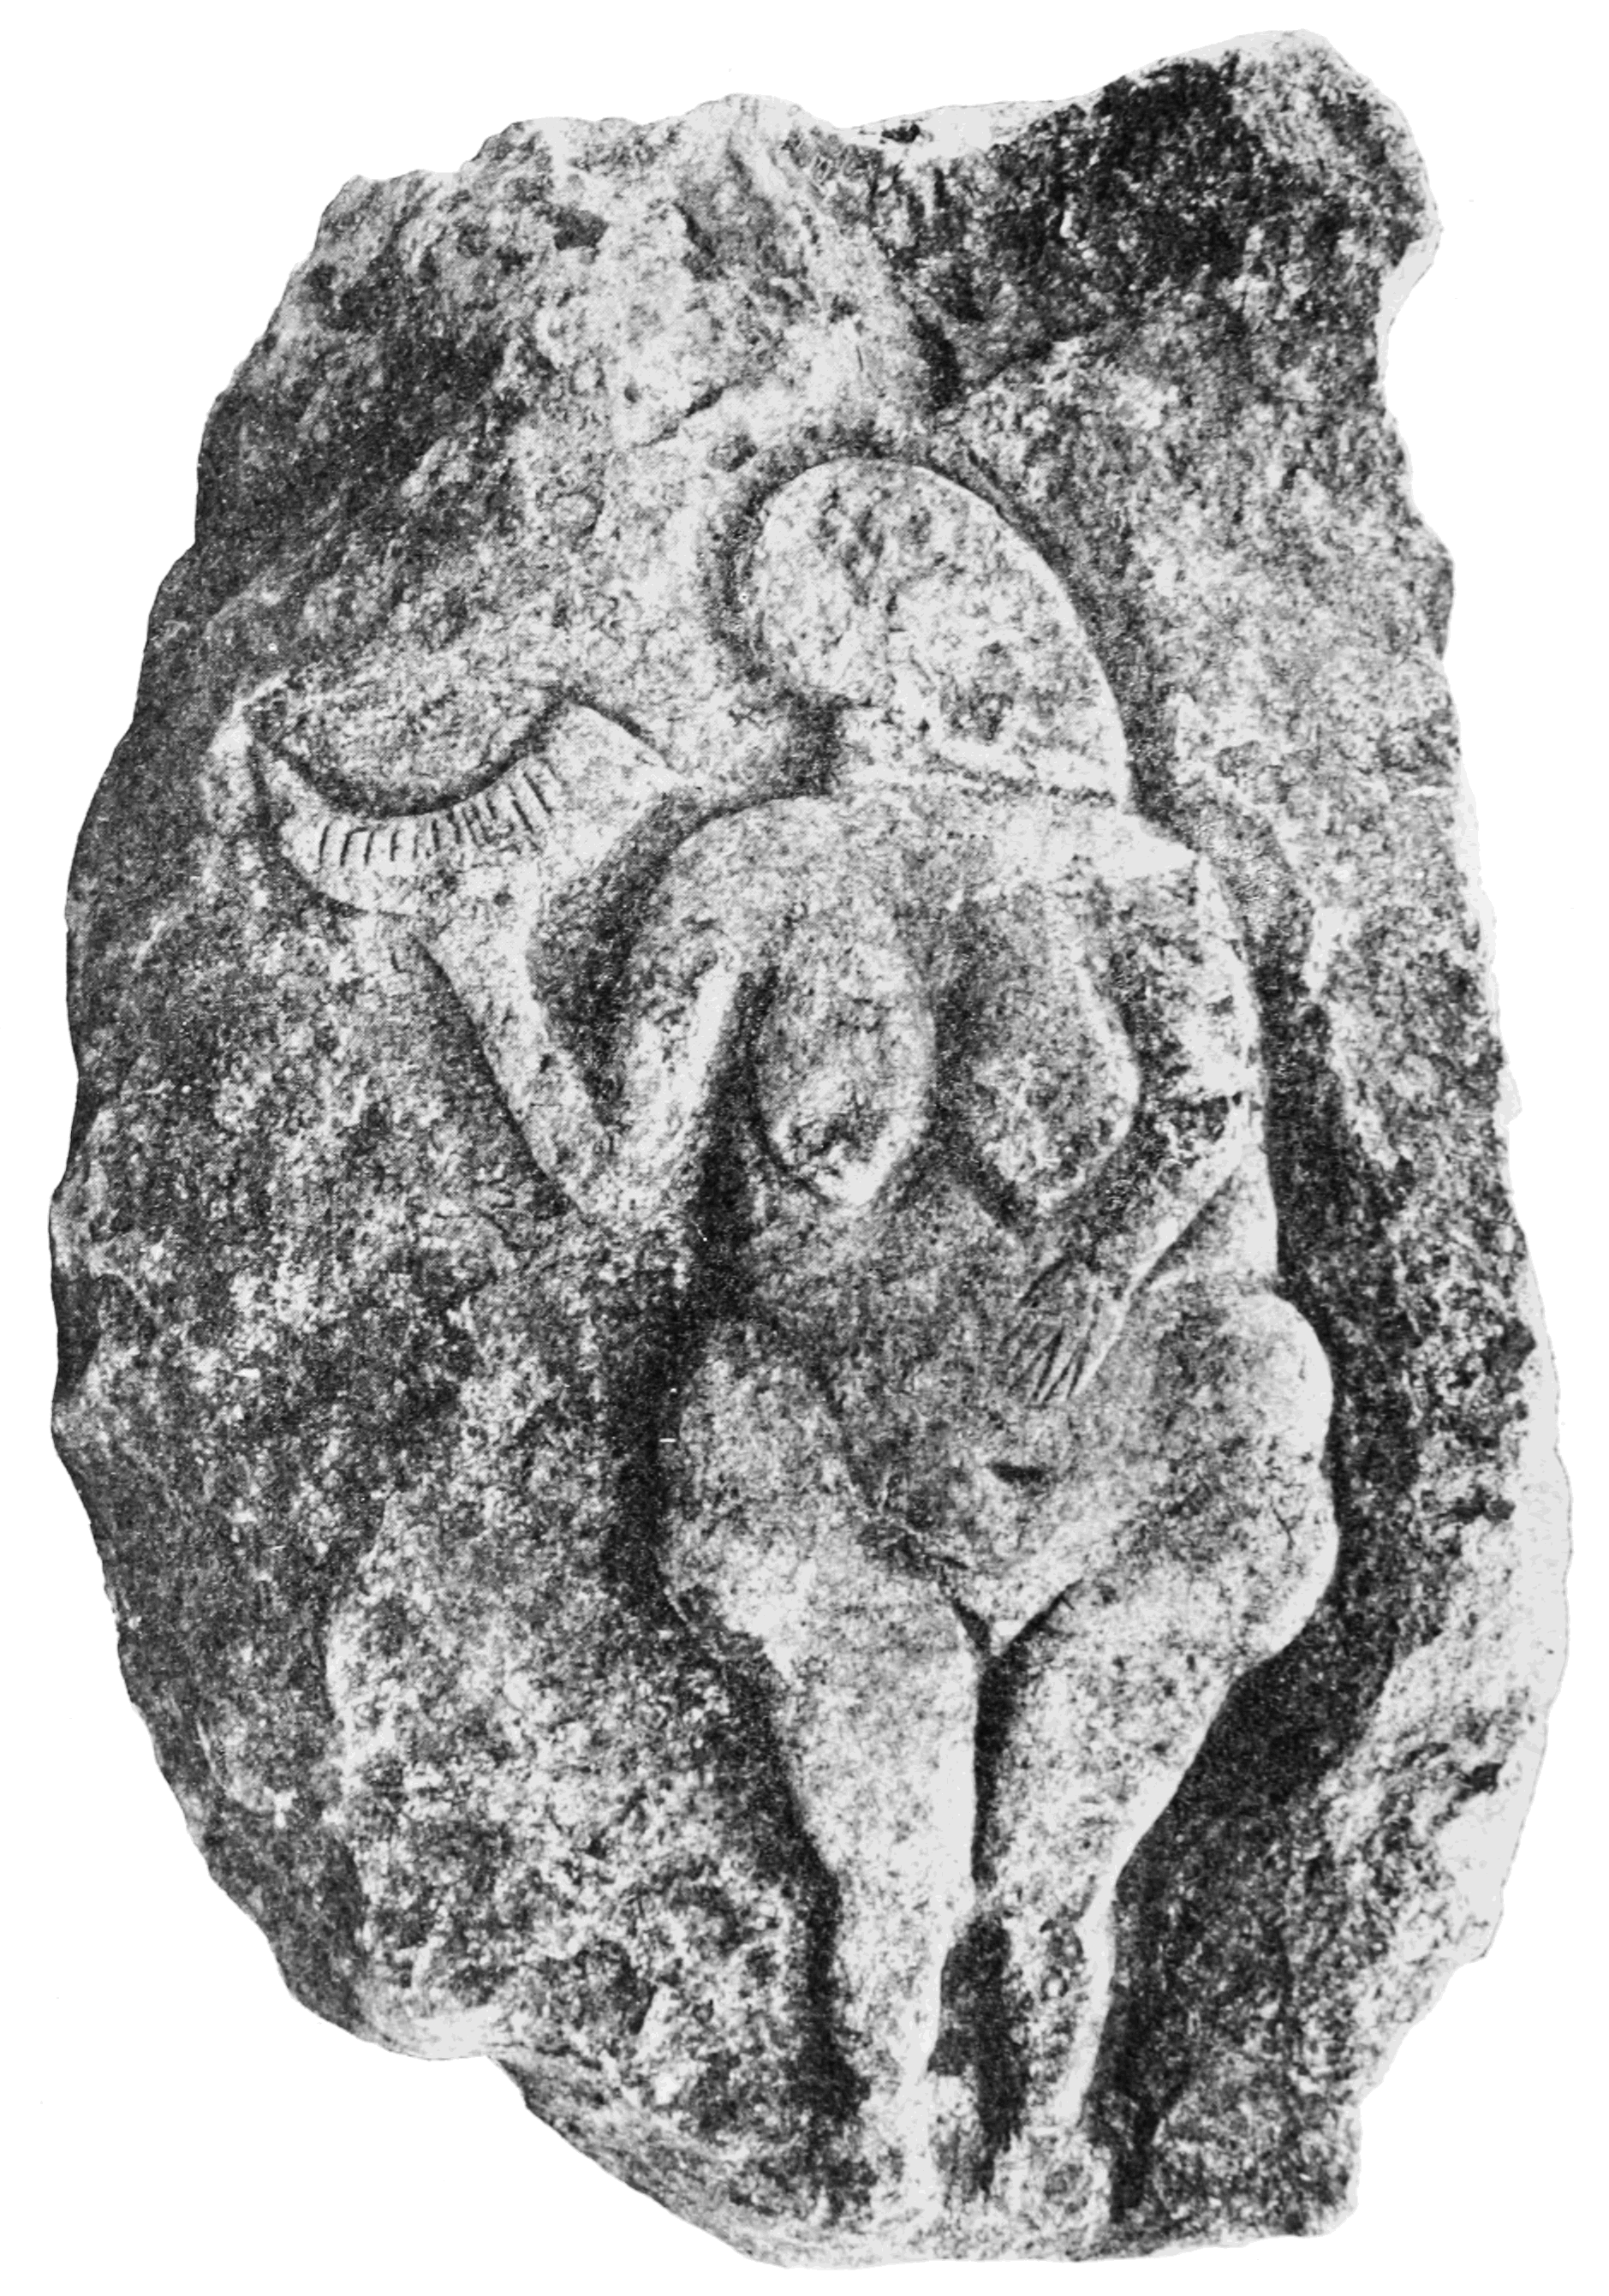 PSM V83 D016 Bas relief from the rock shelter of laussel in dordogne.png